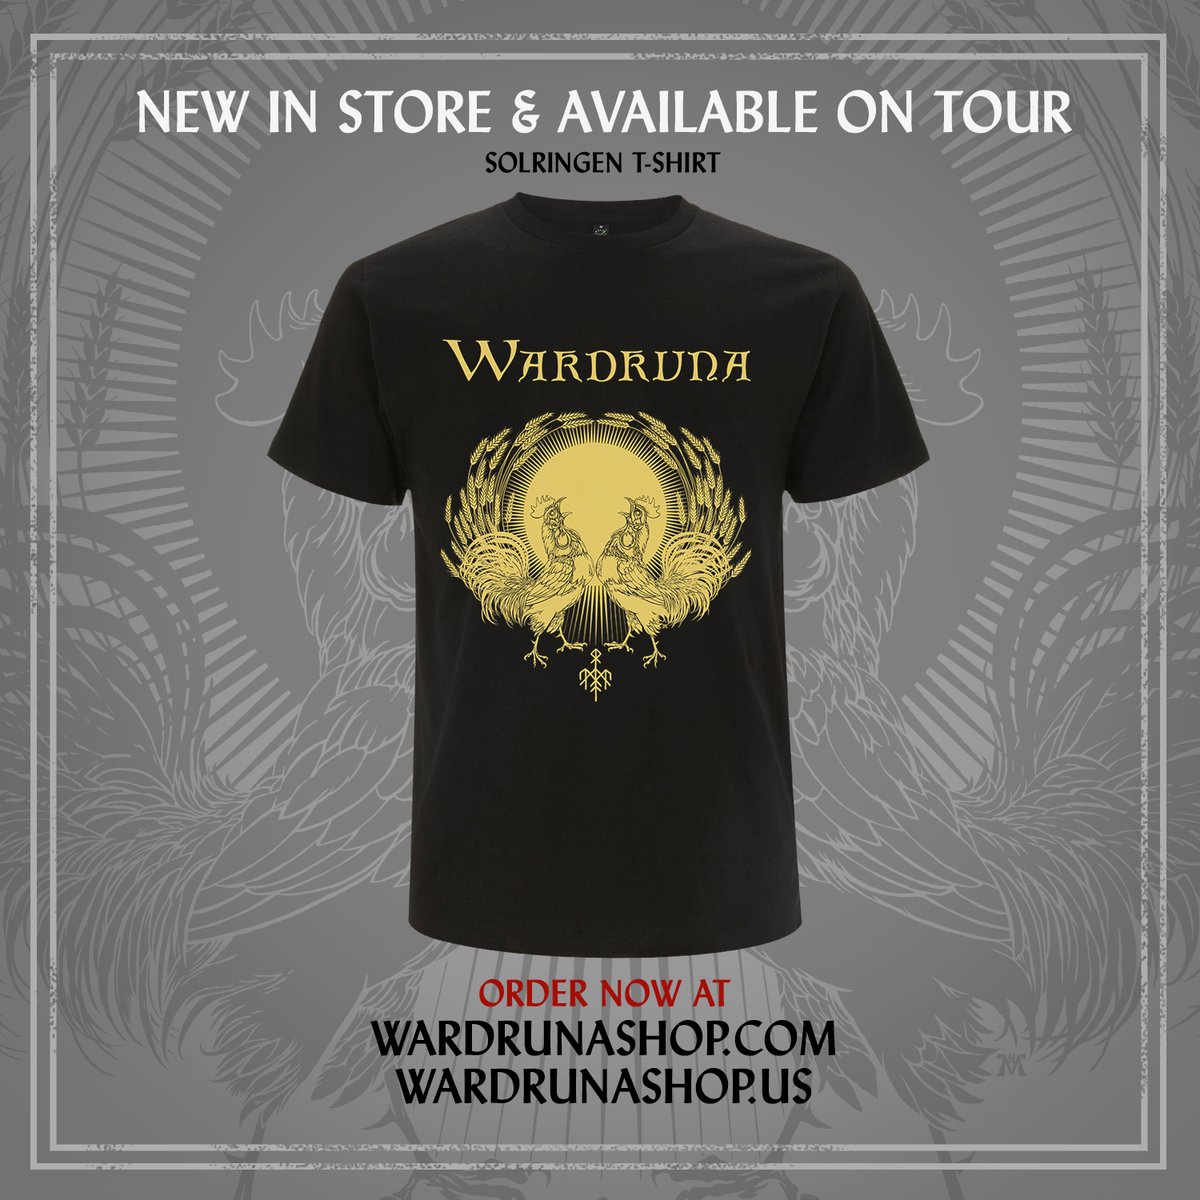 In celebration of our summer shows, we've launched a new design by Marald Art, inspired by the song 'Solringen'. The shirt is available on tour and in our world and US shops now. EU / World ► wardrunashop.com US ► wardrunashop.us #wardruna #solringen